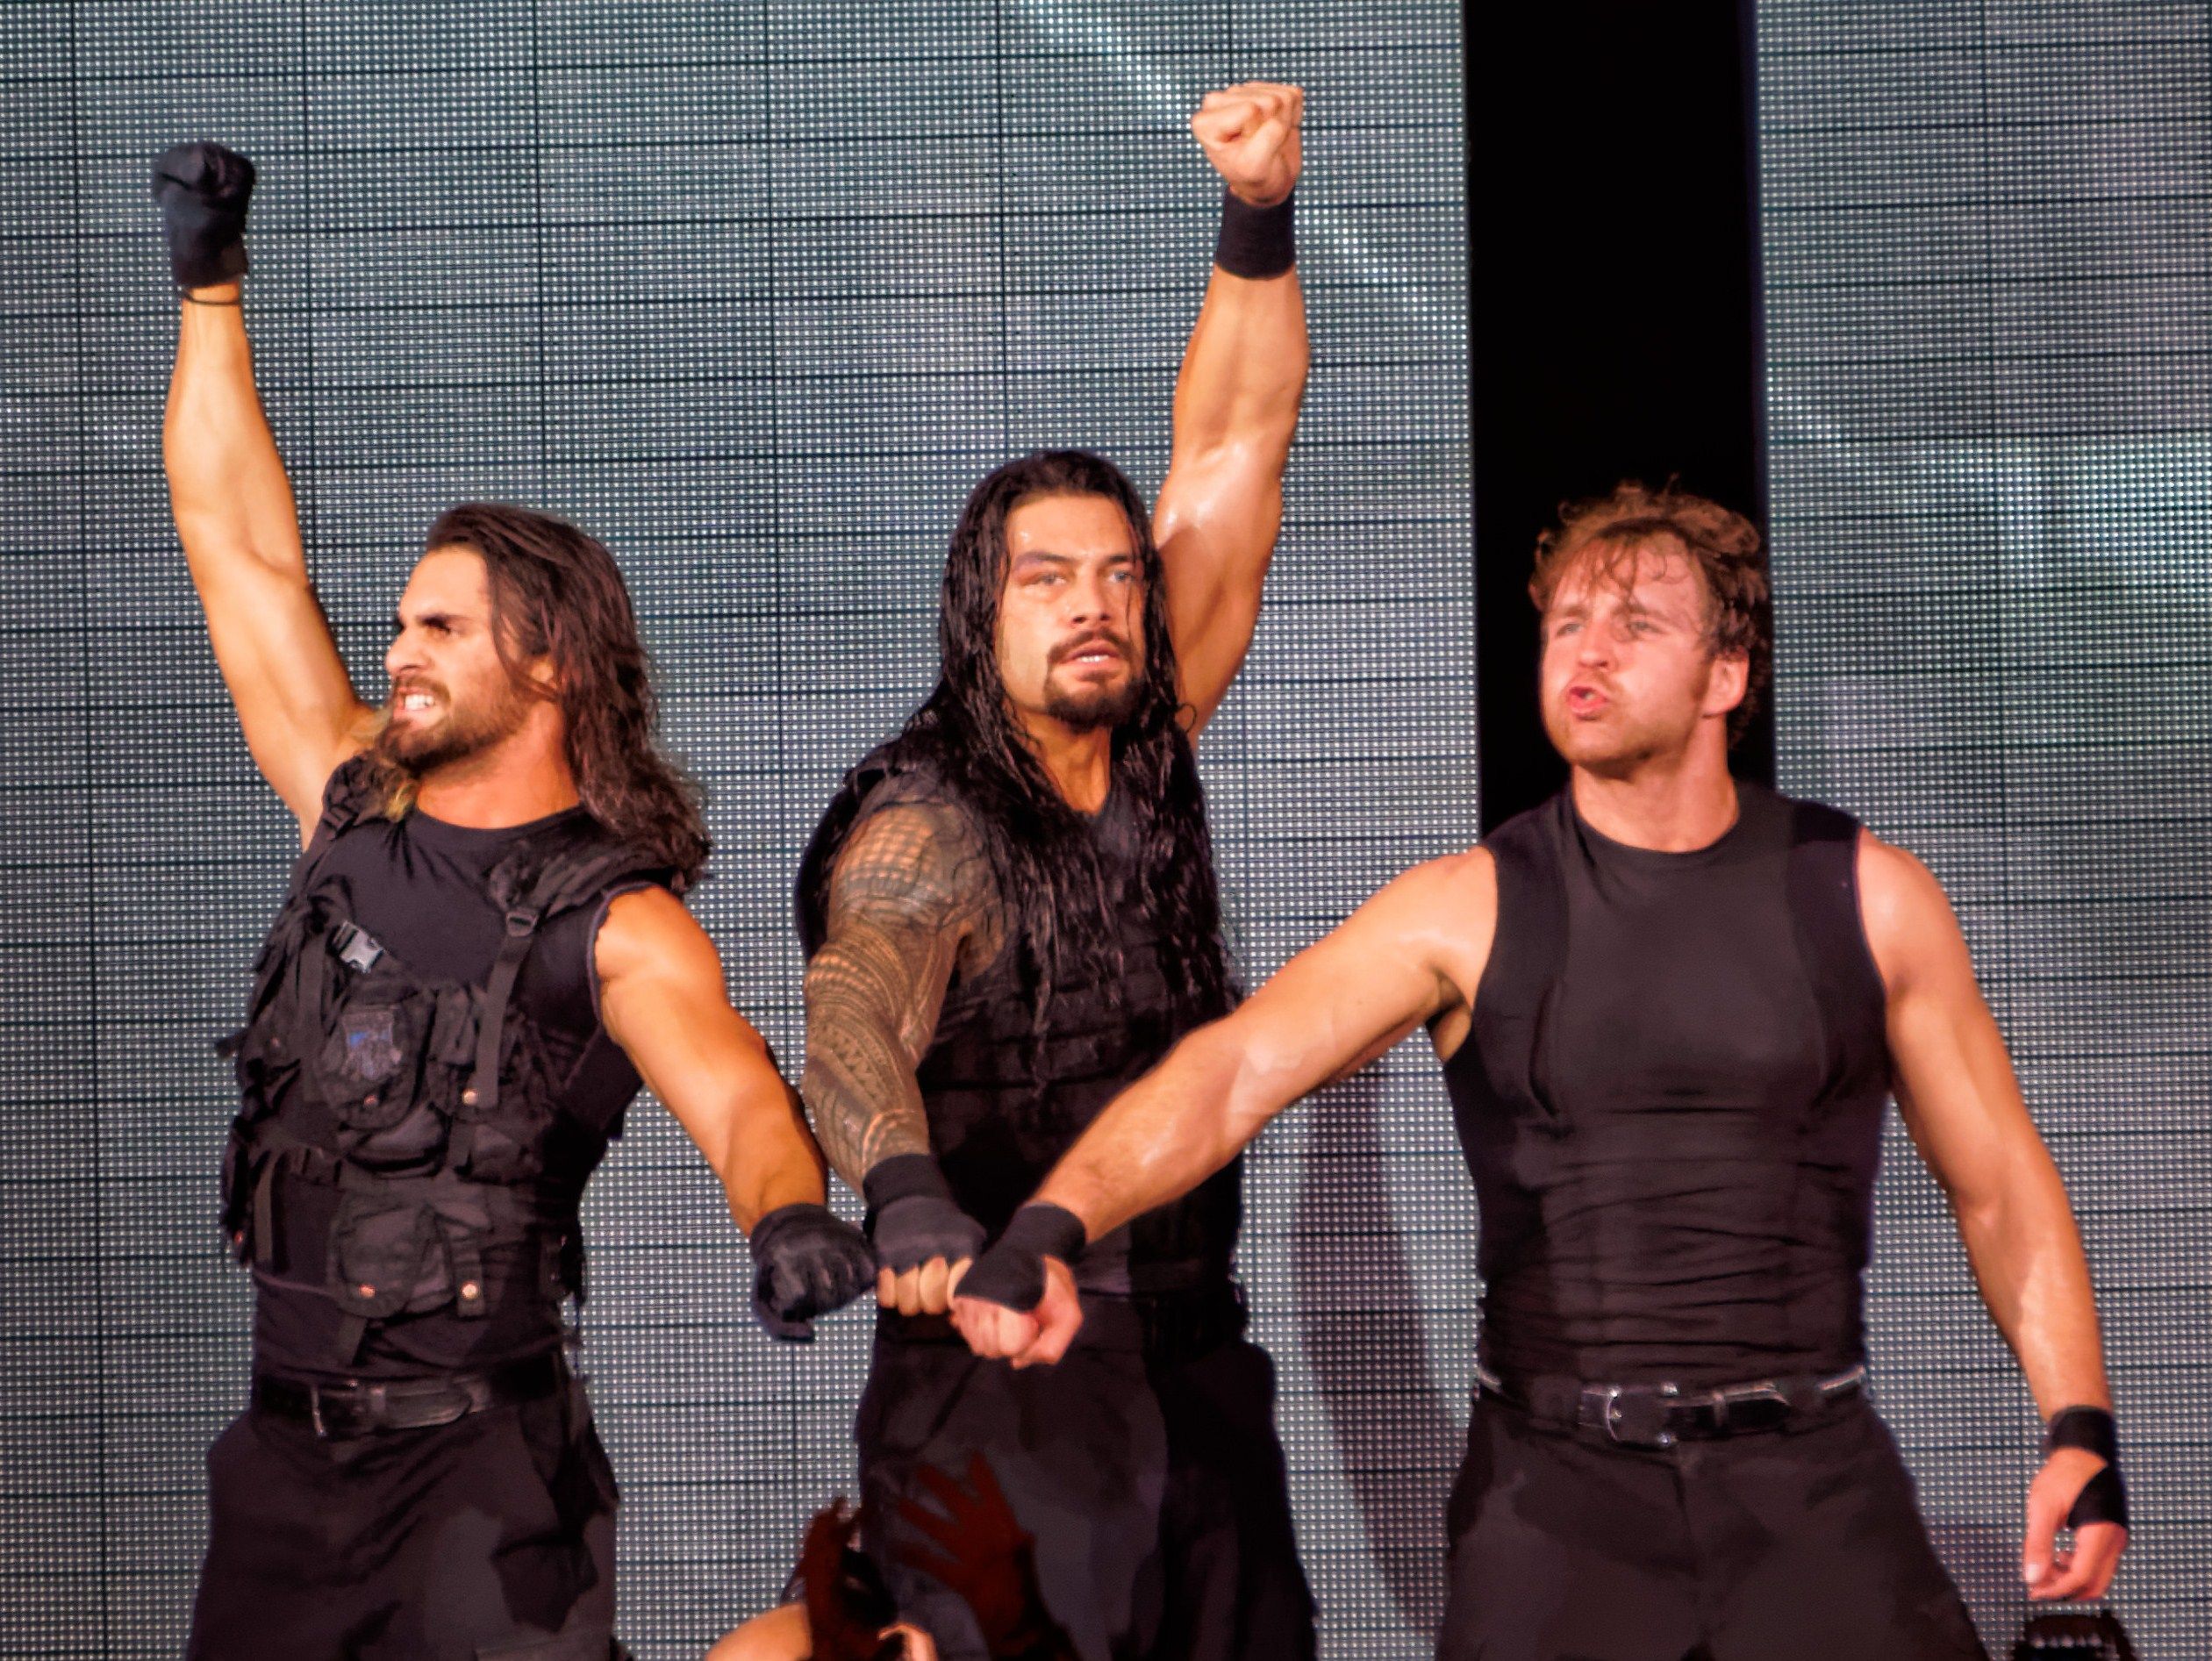 The Shield (professional wrestling)